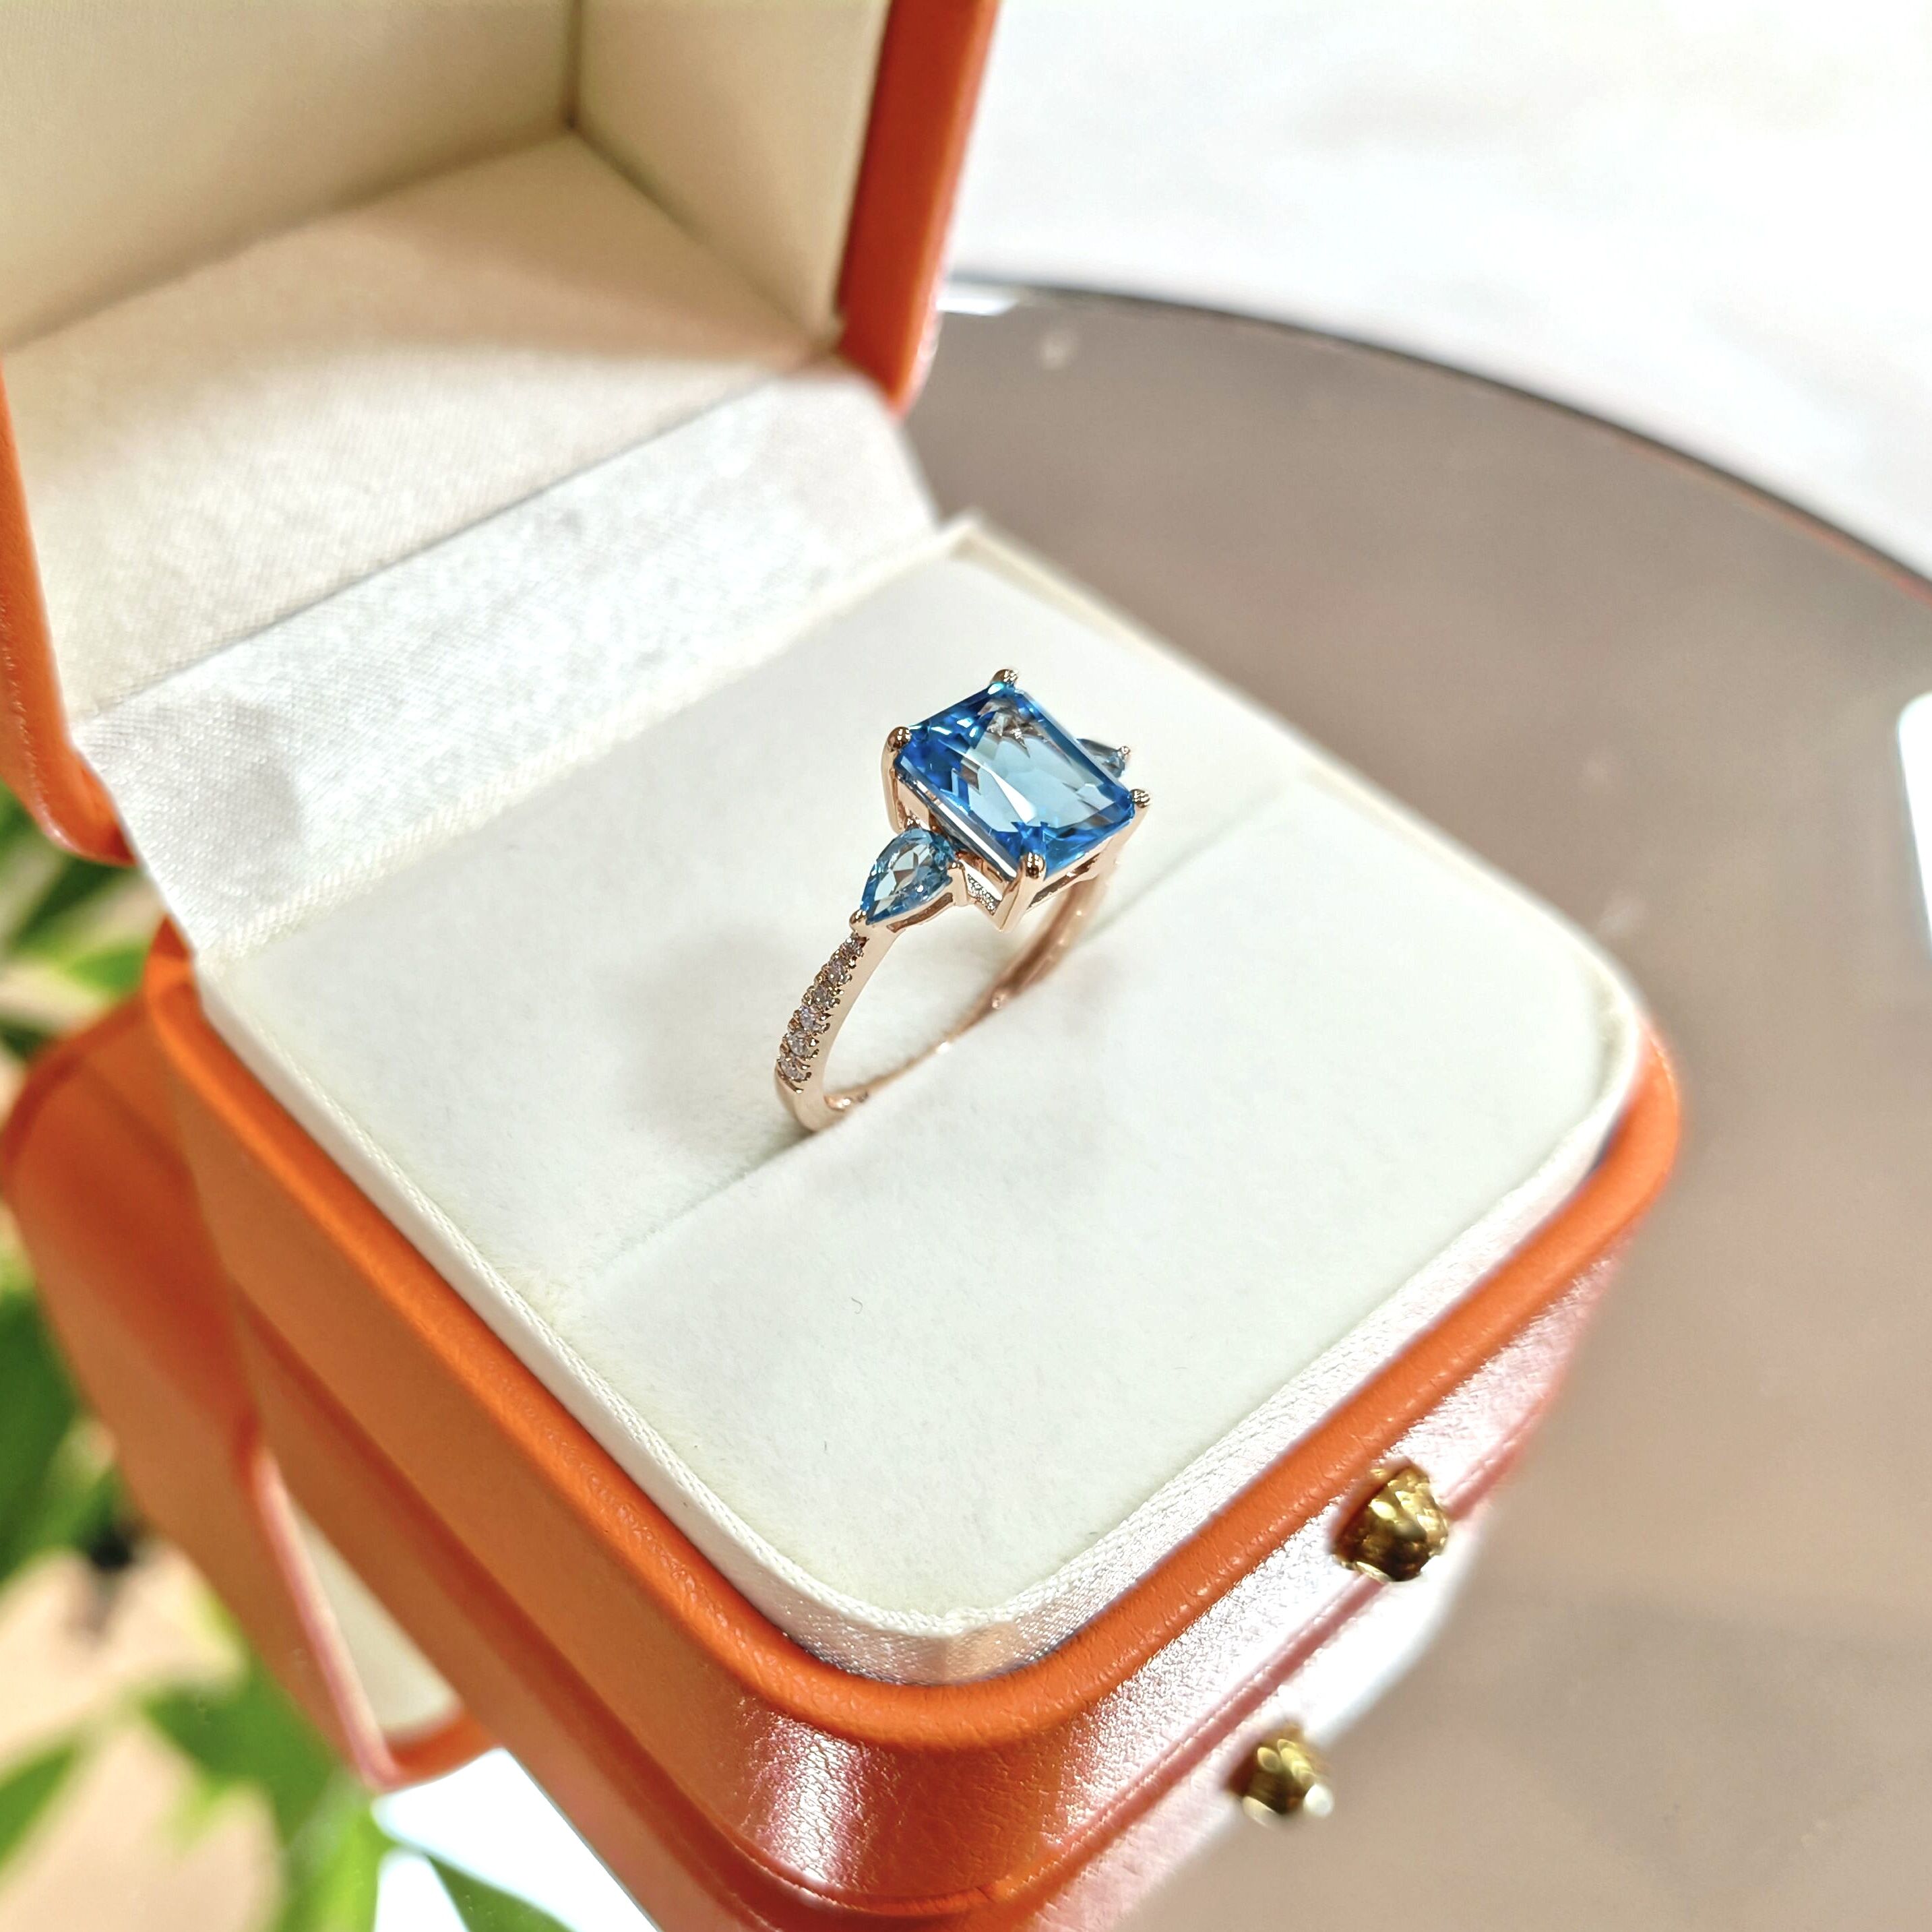 Natural Swiss Blue Topaz Emerald Cut 585 Pure Solid Gold Three Stone Wedding Ring